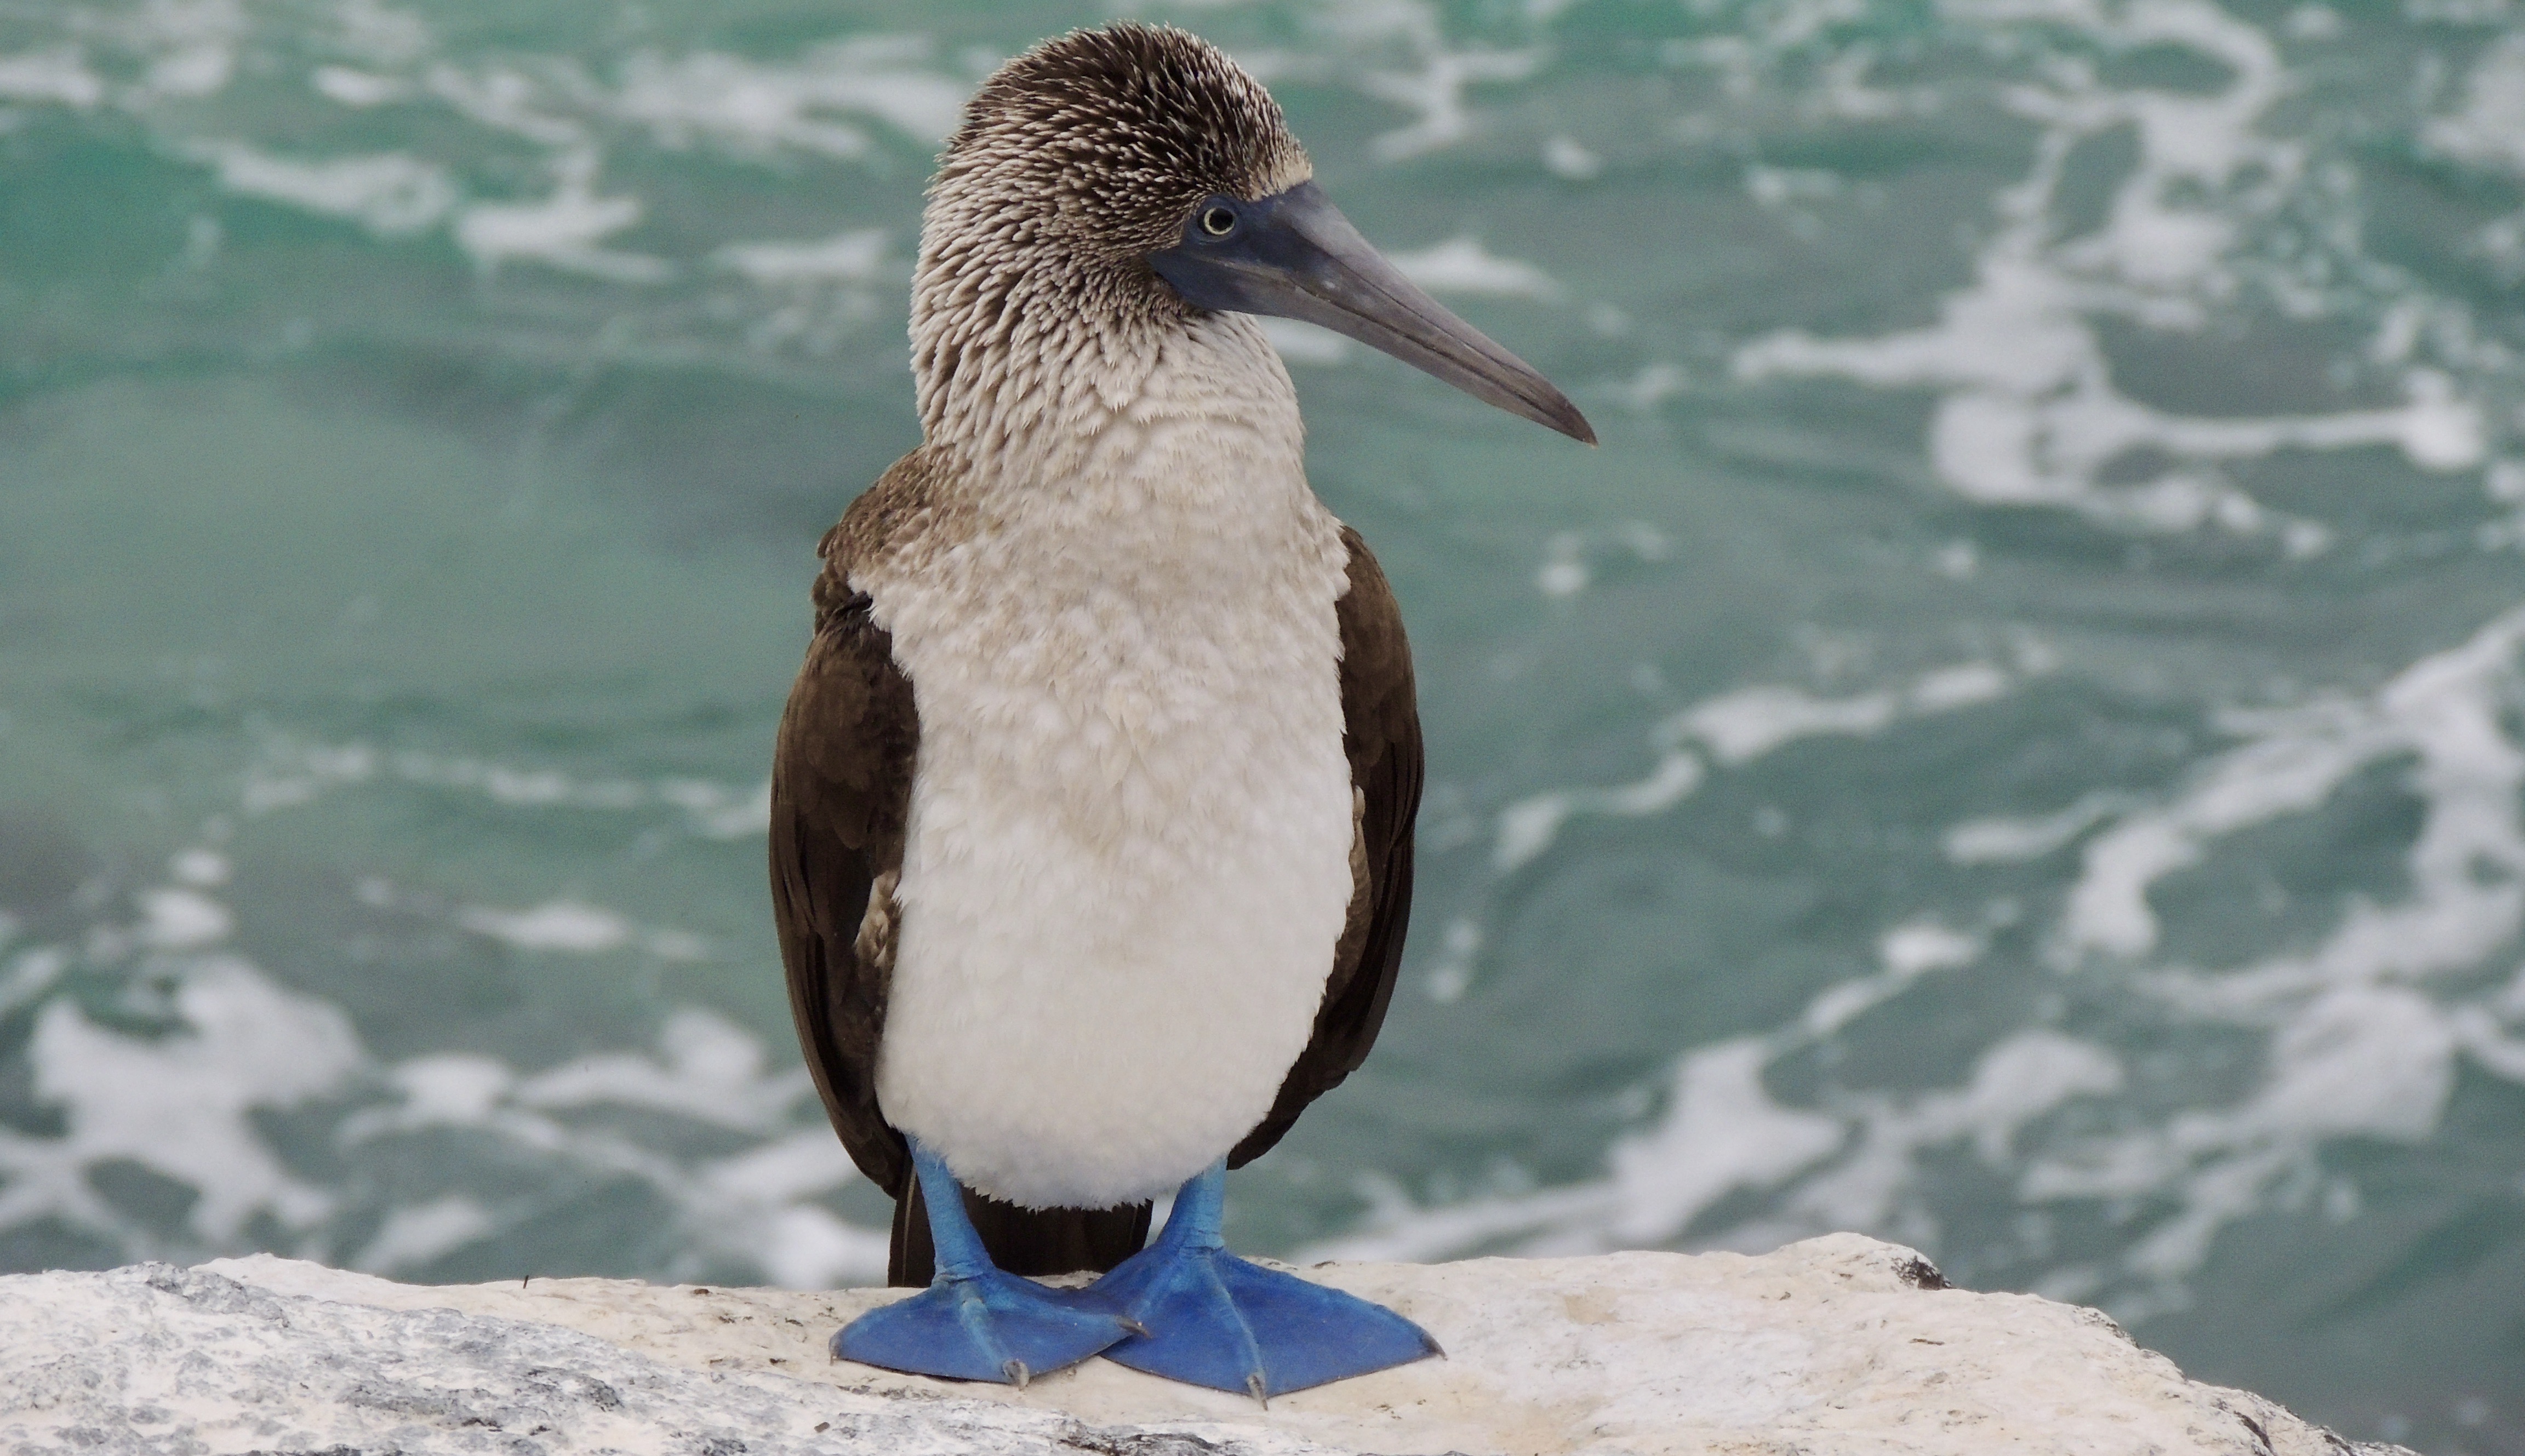 A close up of a blue footed booby standing on a white rock with foaming blue sea behind